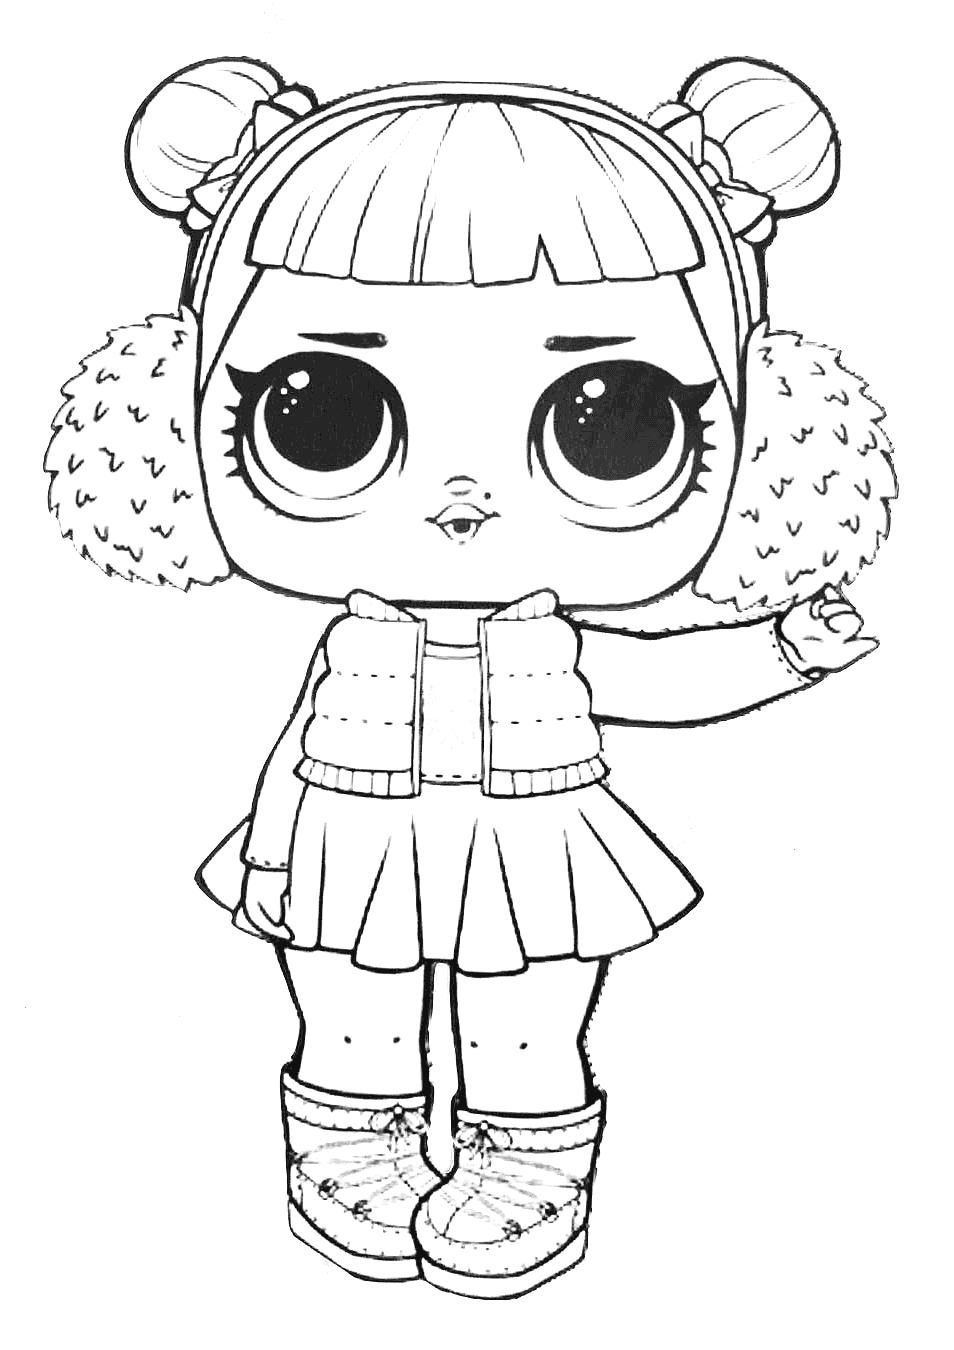 Snow Angel Lol Doll Coloring Page   Free Printable Coloring Pages ...